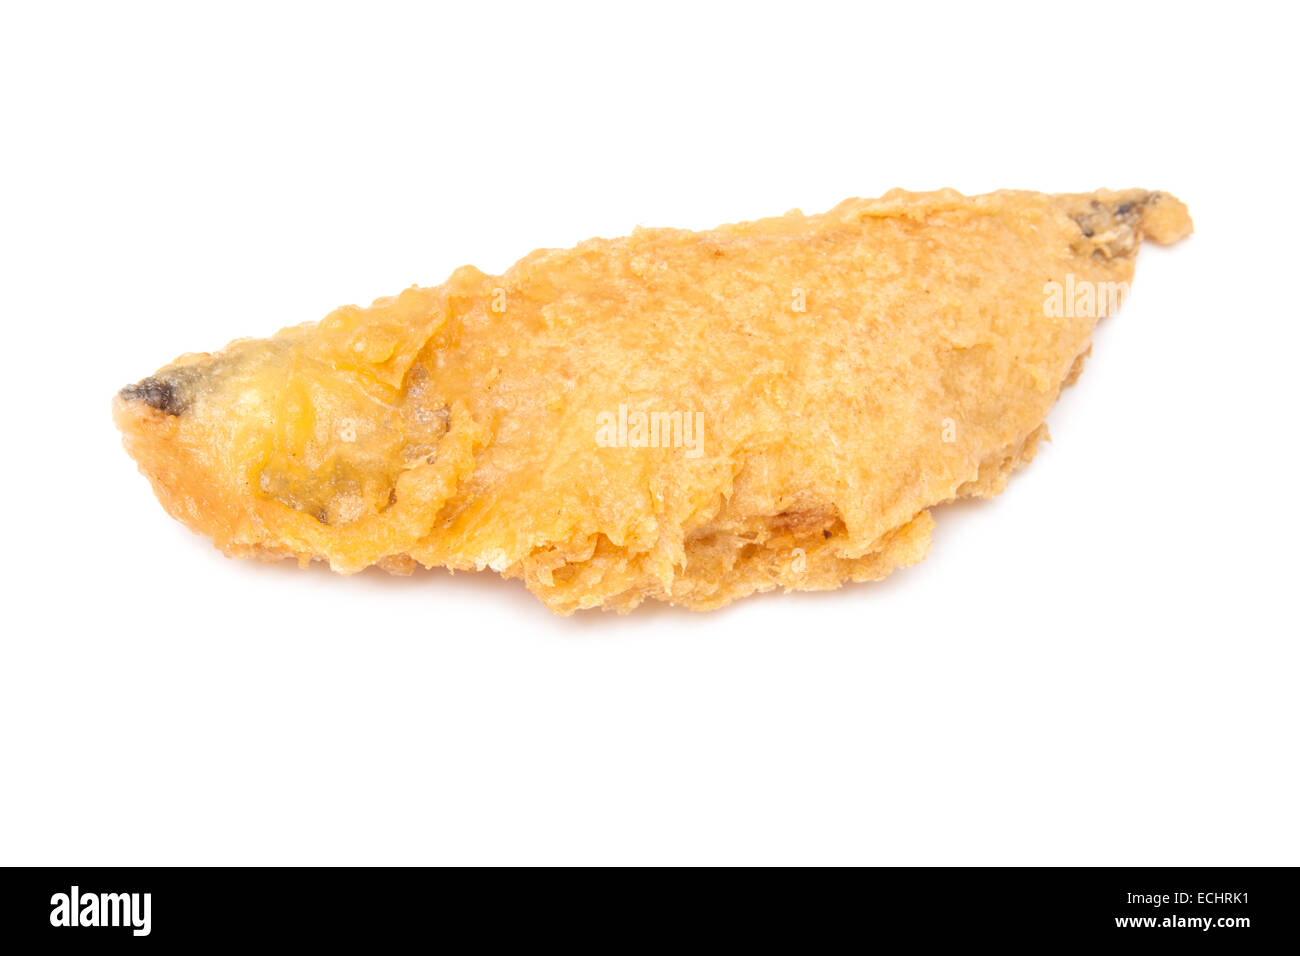 Fillet of battered deep fried Haddock fresh from the fish and chip shop. Stock Photo